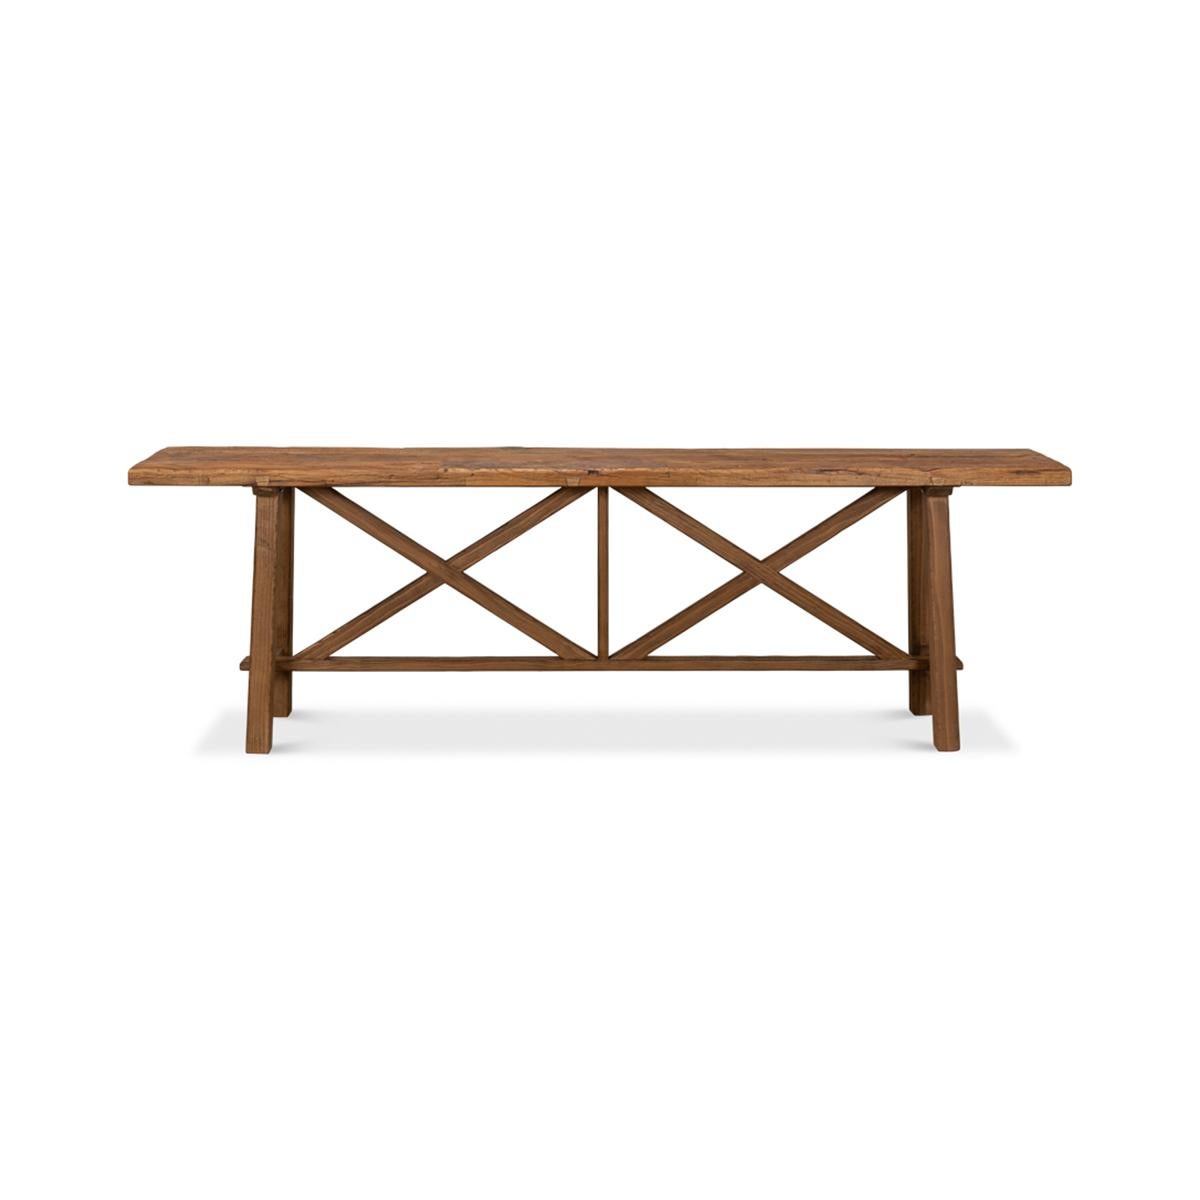 A modern reclaimed wood console table. A truly unique piece crafted from 100-year-old floorboards. The reclaimed top sits on a pine base with a double x design. 

Dimensions: 93